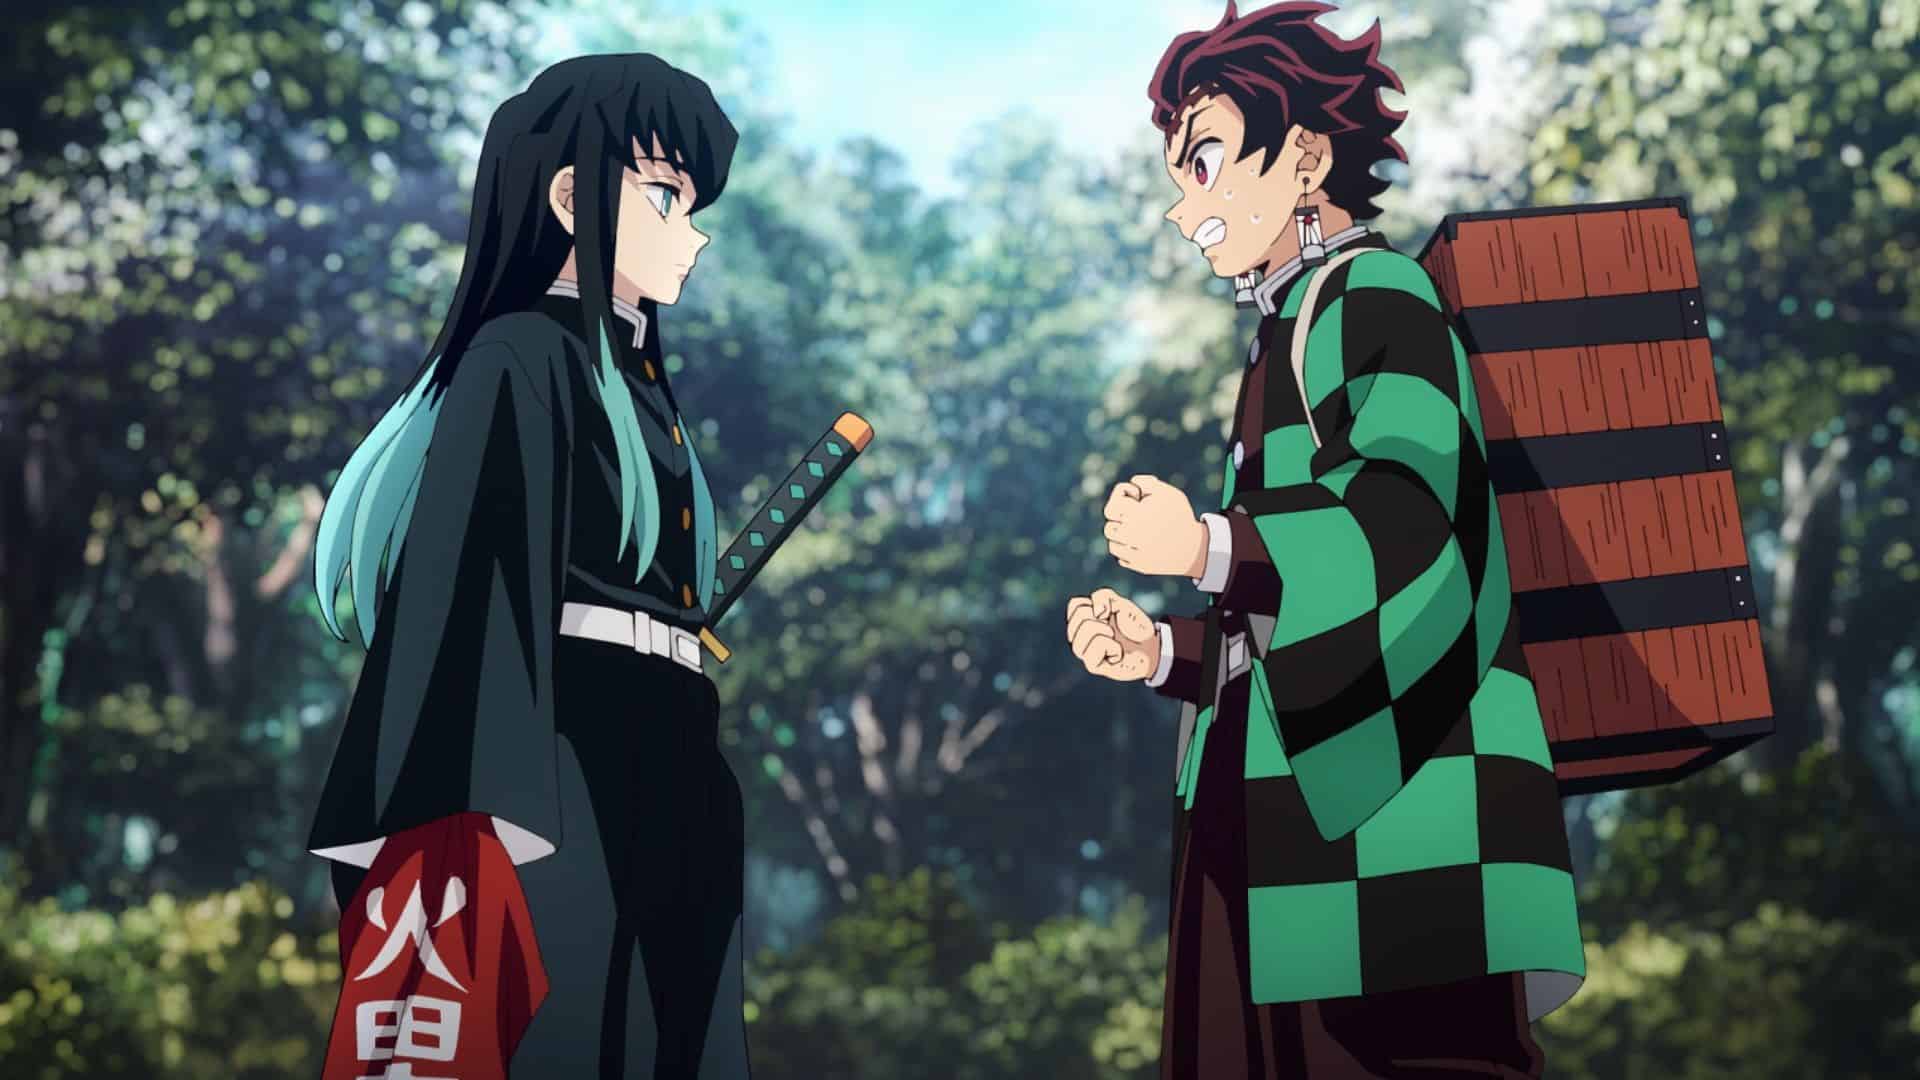 What time is Demon Slayer season 3 coming out? (April 9, 2023)